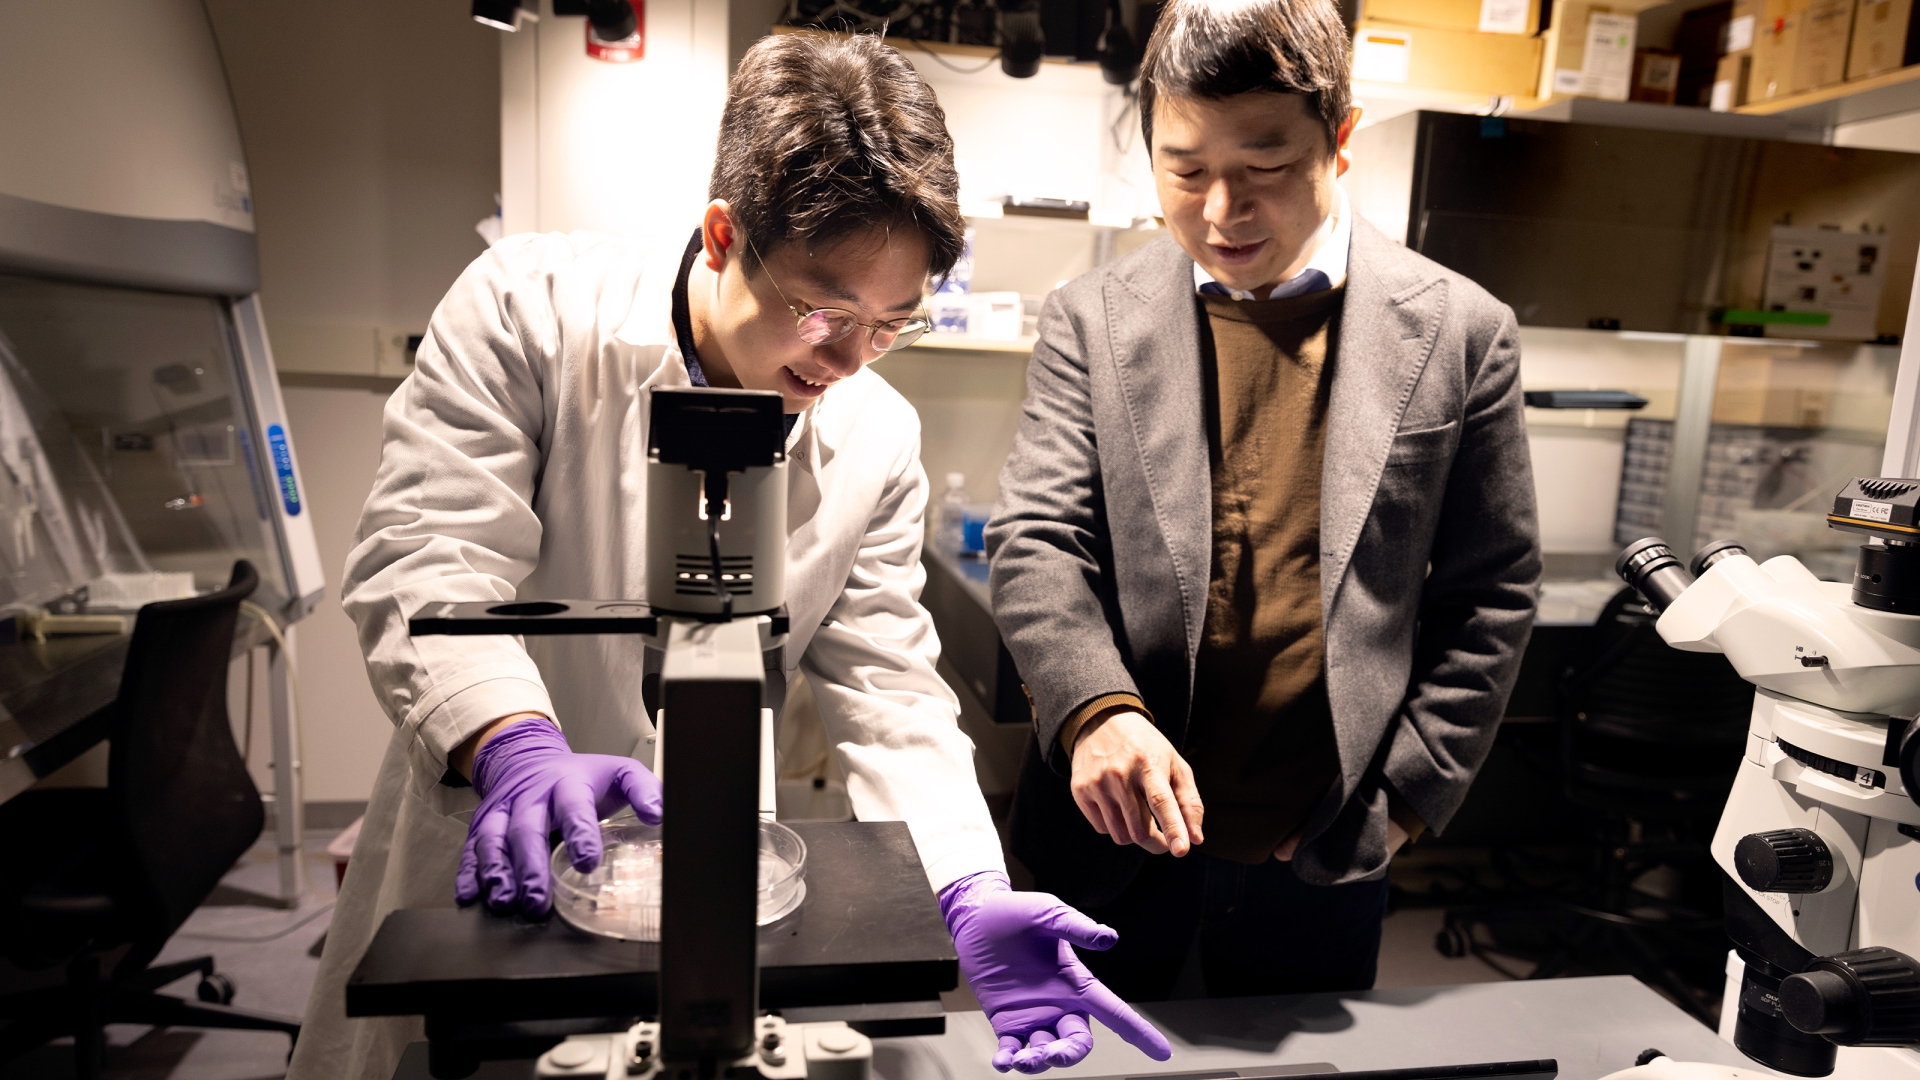 Jianping Fu, Ph.D., Professor of Mechanical Engineering at the University of Michigan and the corresponding author of the paper being published at Nature discusses his team’s work in their lab with Jeyoon Bok, Ph.D. candidate at the Department of Mechanical Engineering. 